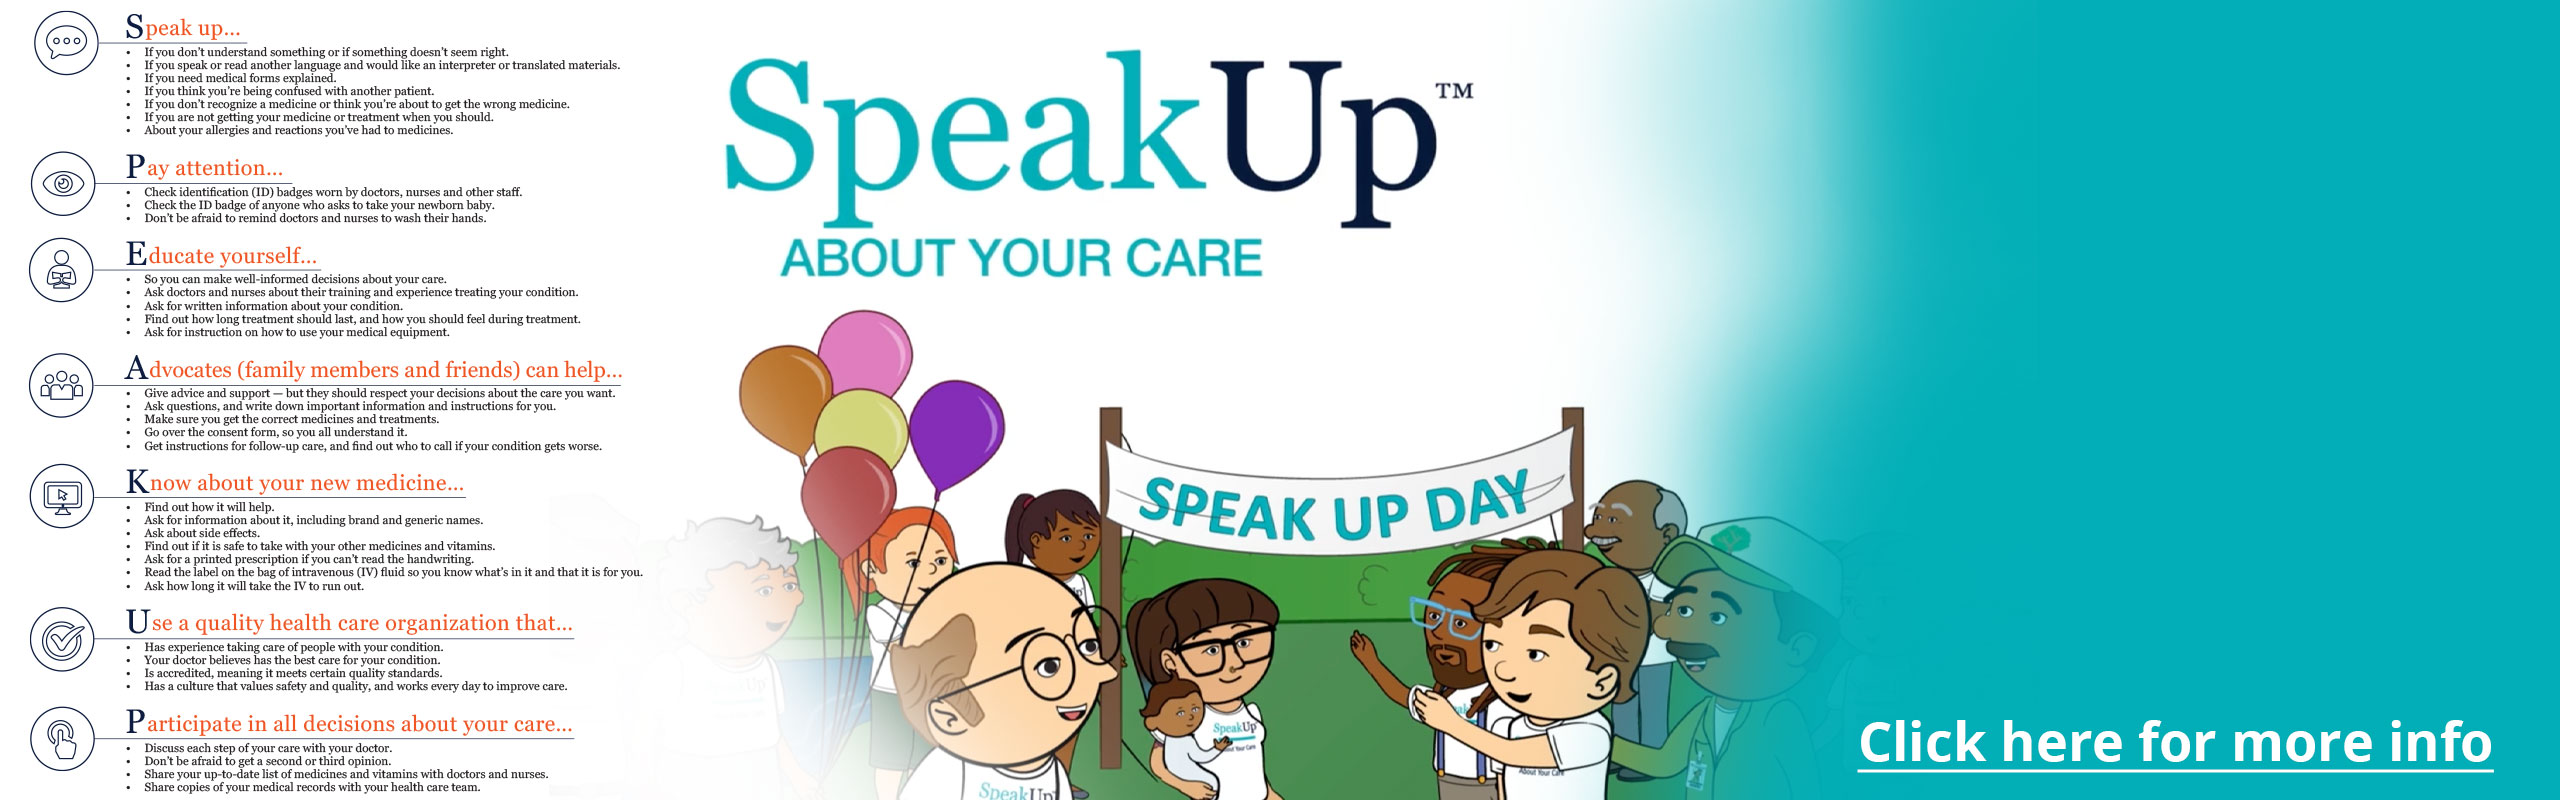 Speak up
Pay attention
Educate yourself
Advocates (family members and friends) can help...
Know about your new medicine...
Use a quality health care organization
Participate in all decisions about your care

(Click here for more info)